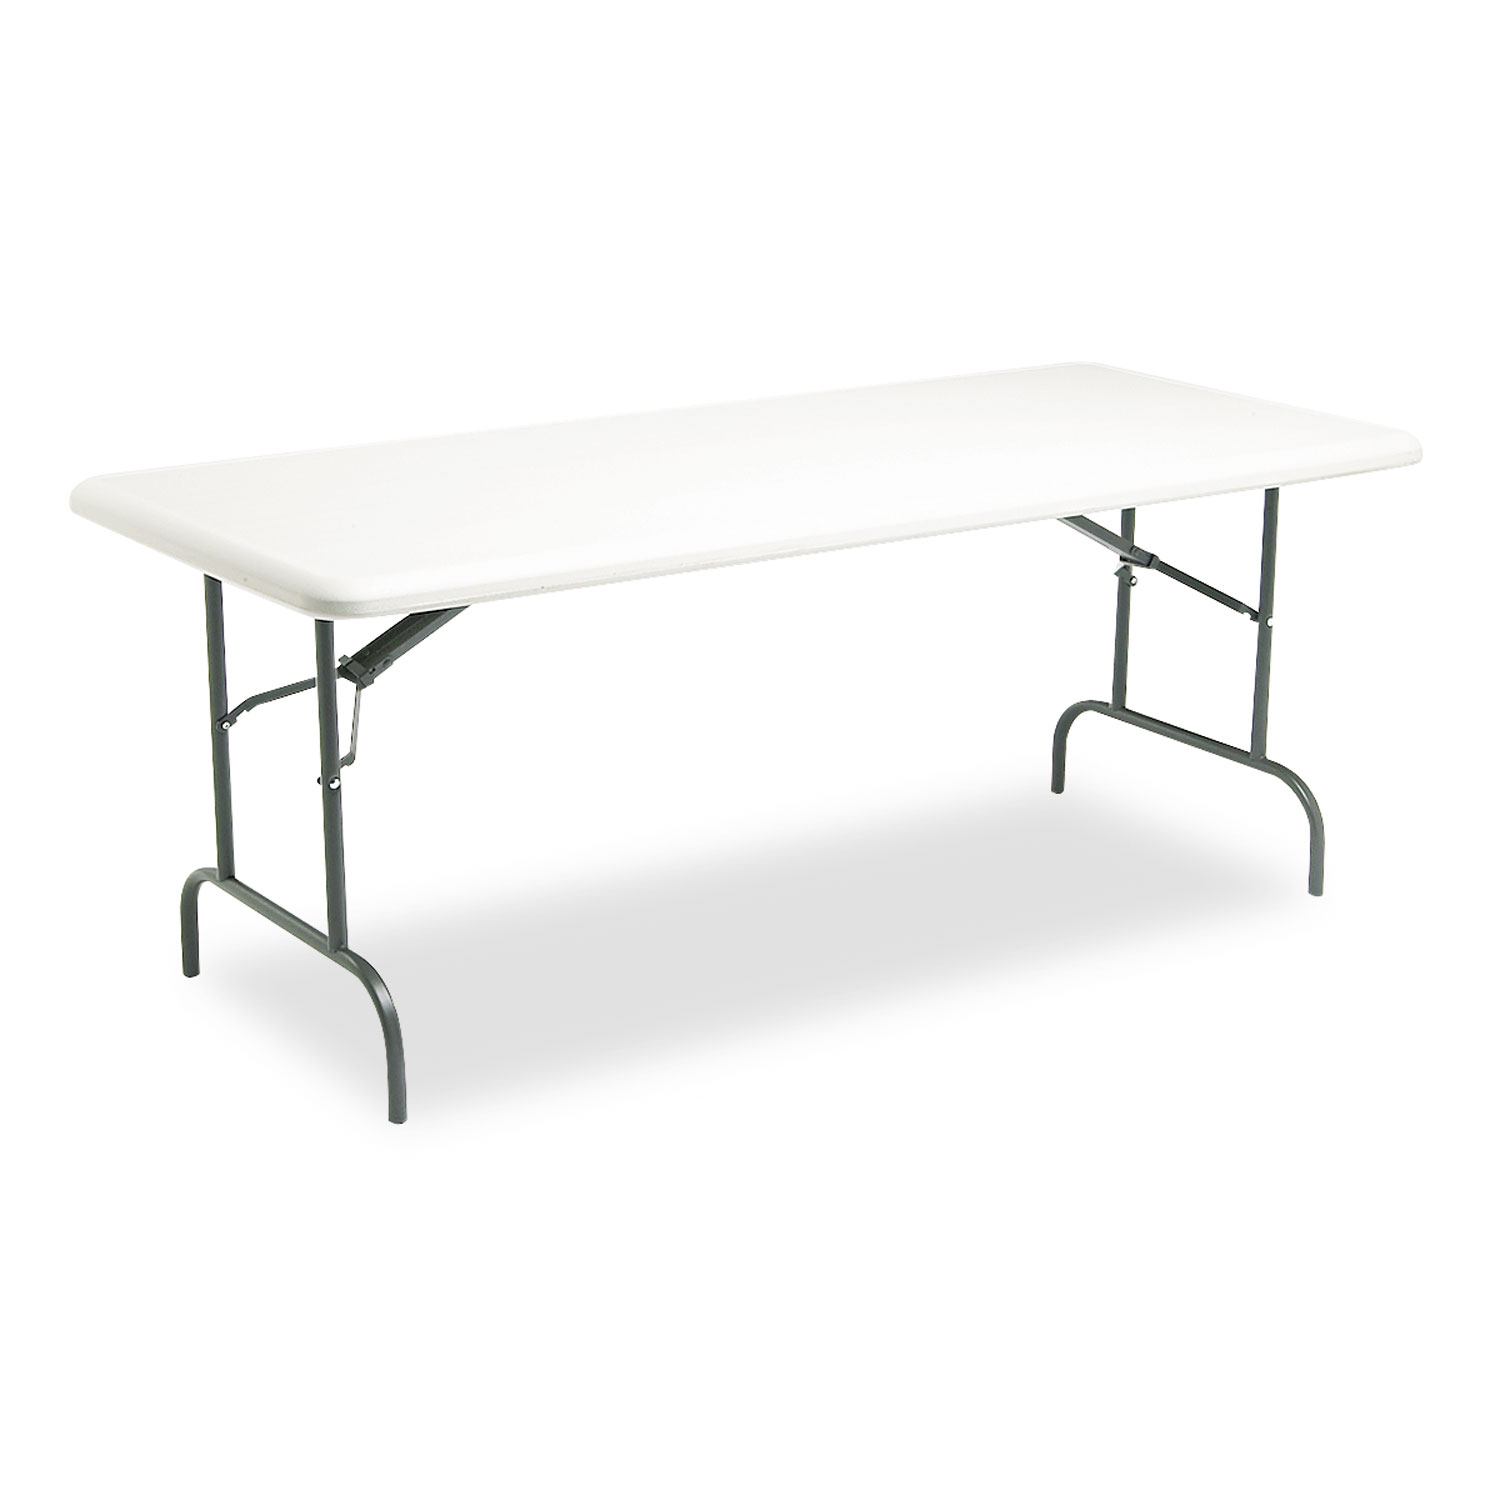 IndestrucTables Too 1200 Series Resin Folding Table, 72w x 30d x 29h, Platinum